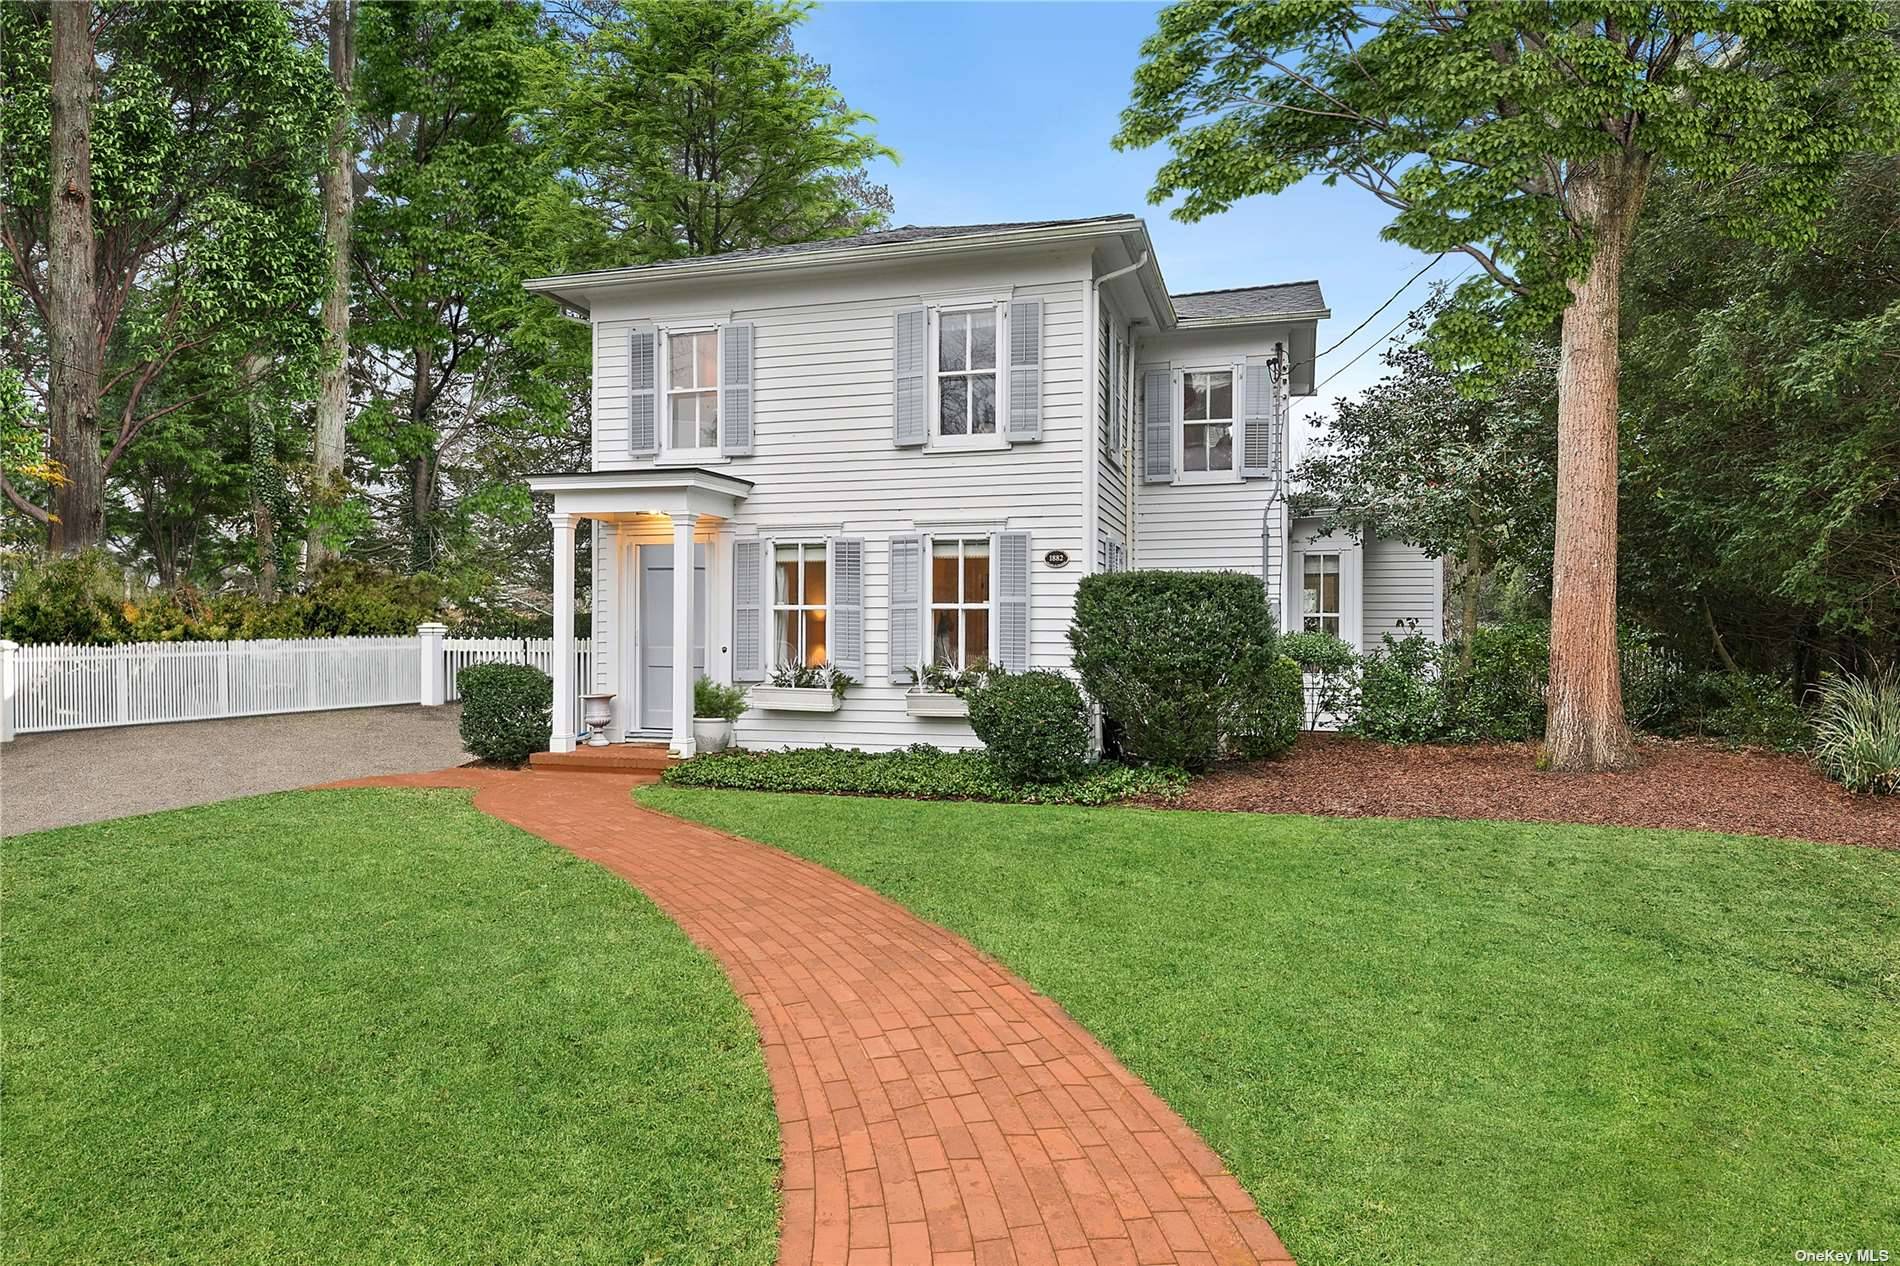 Step into casual charm at 178 South Country Road, nestled in the heart of Bellport's coveted historic village.